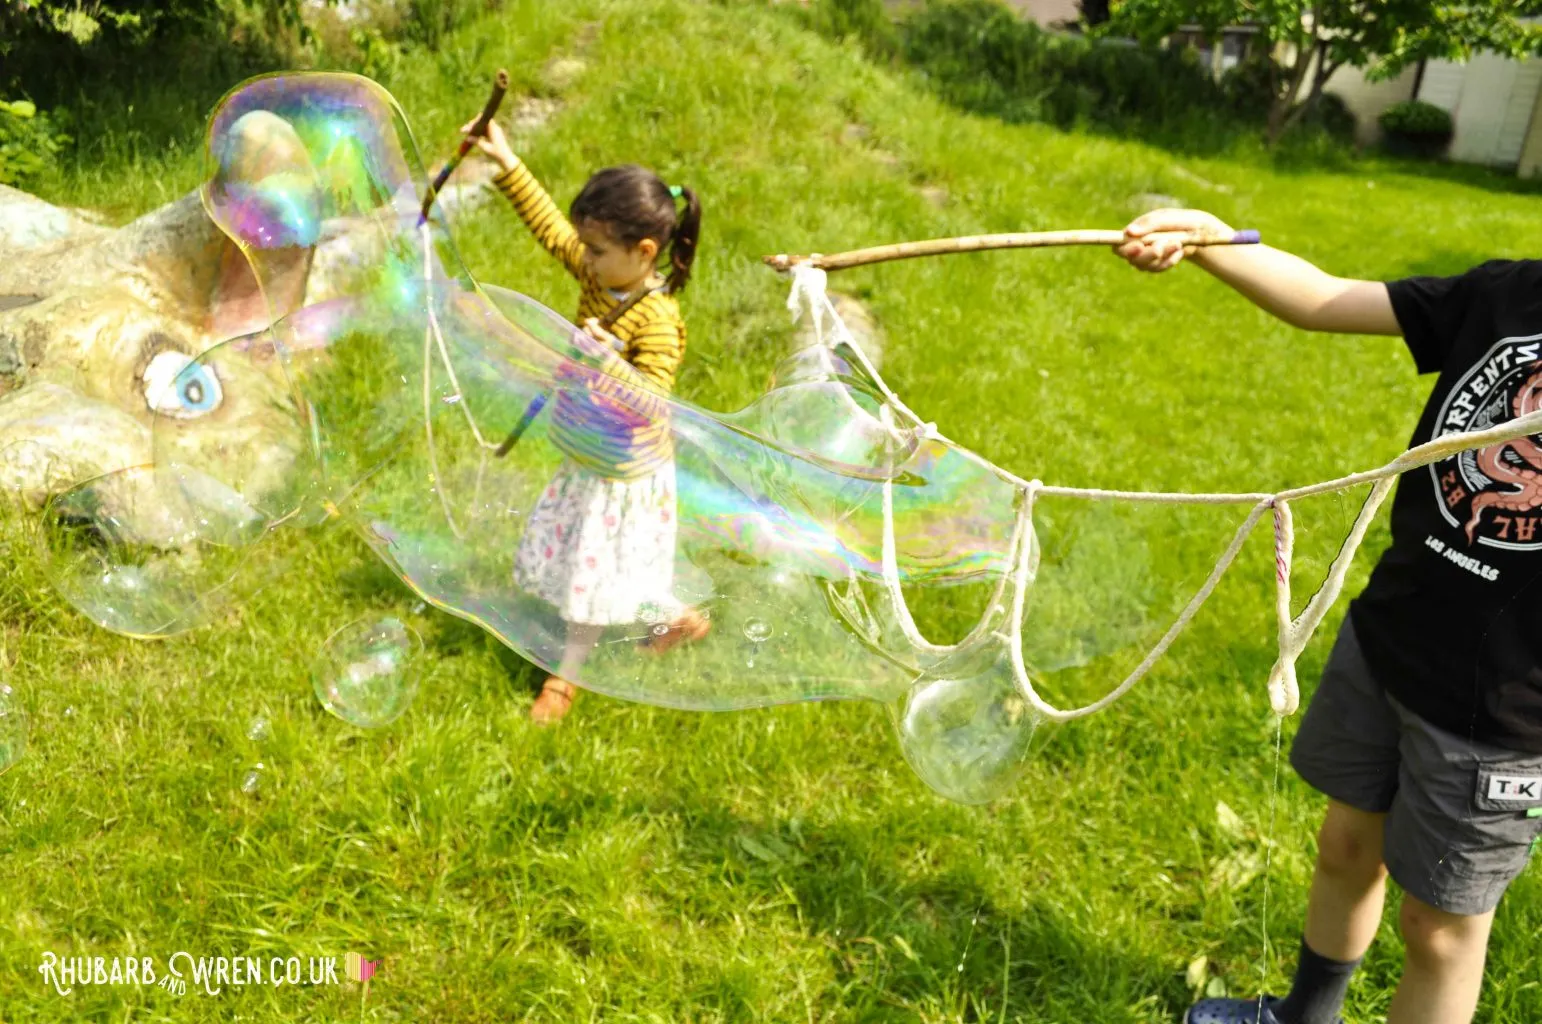 Children making giant bubbles with home-made wands